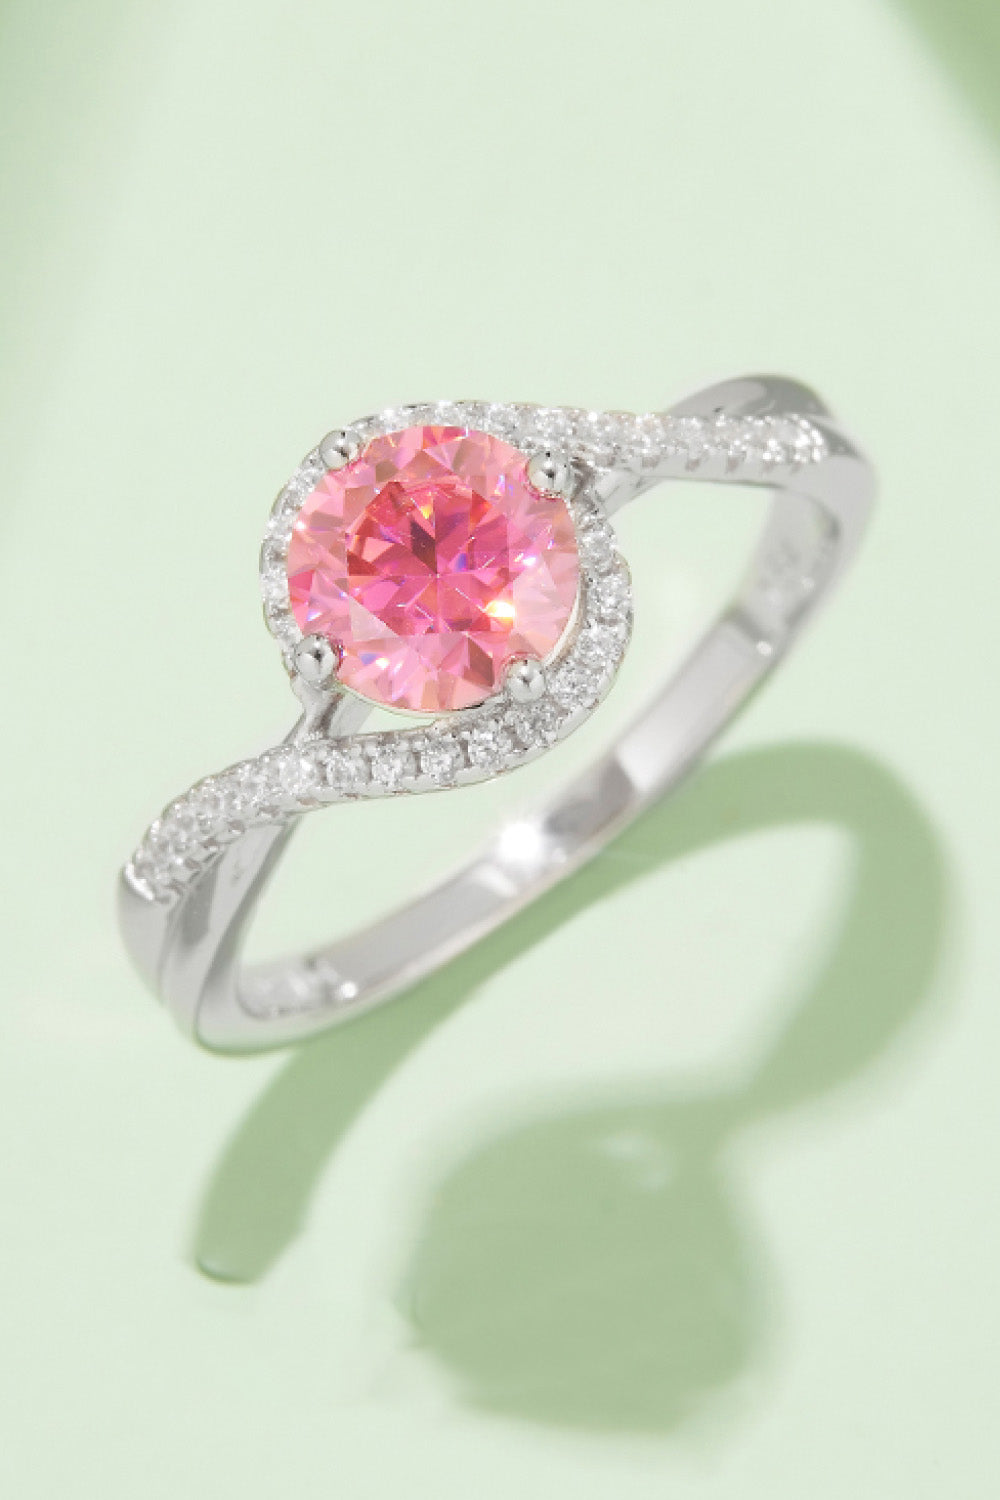 1 Carat Moissanite Contrast 925 Sterling Silver Ring Hot Pink